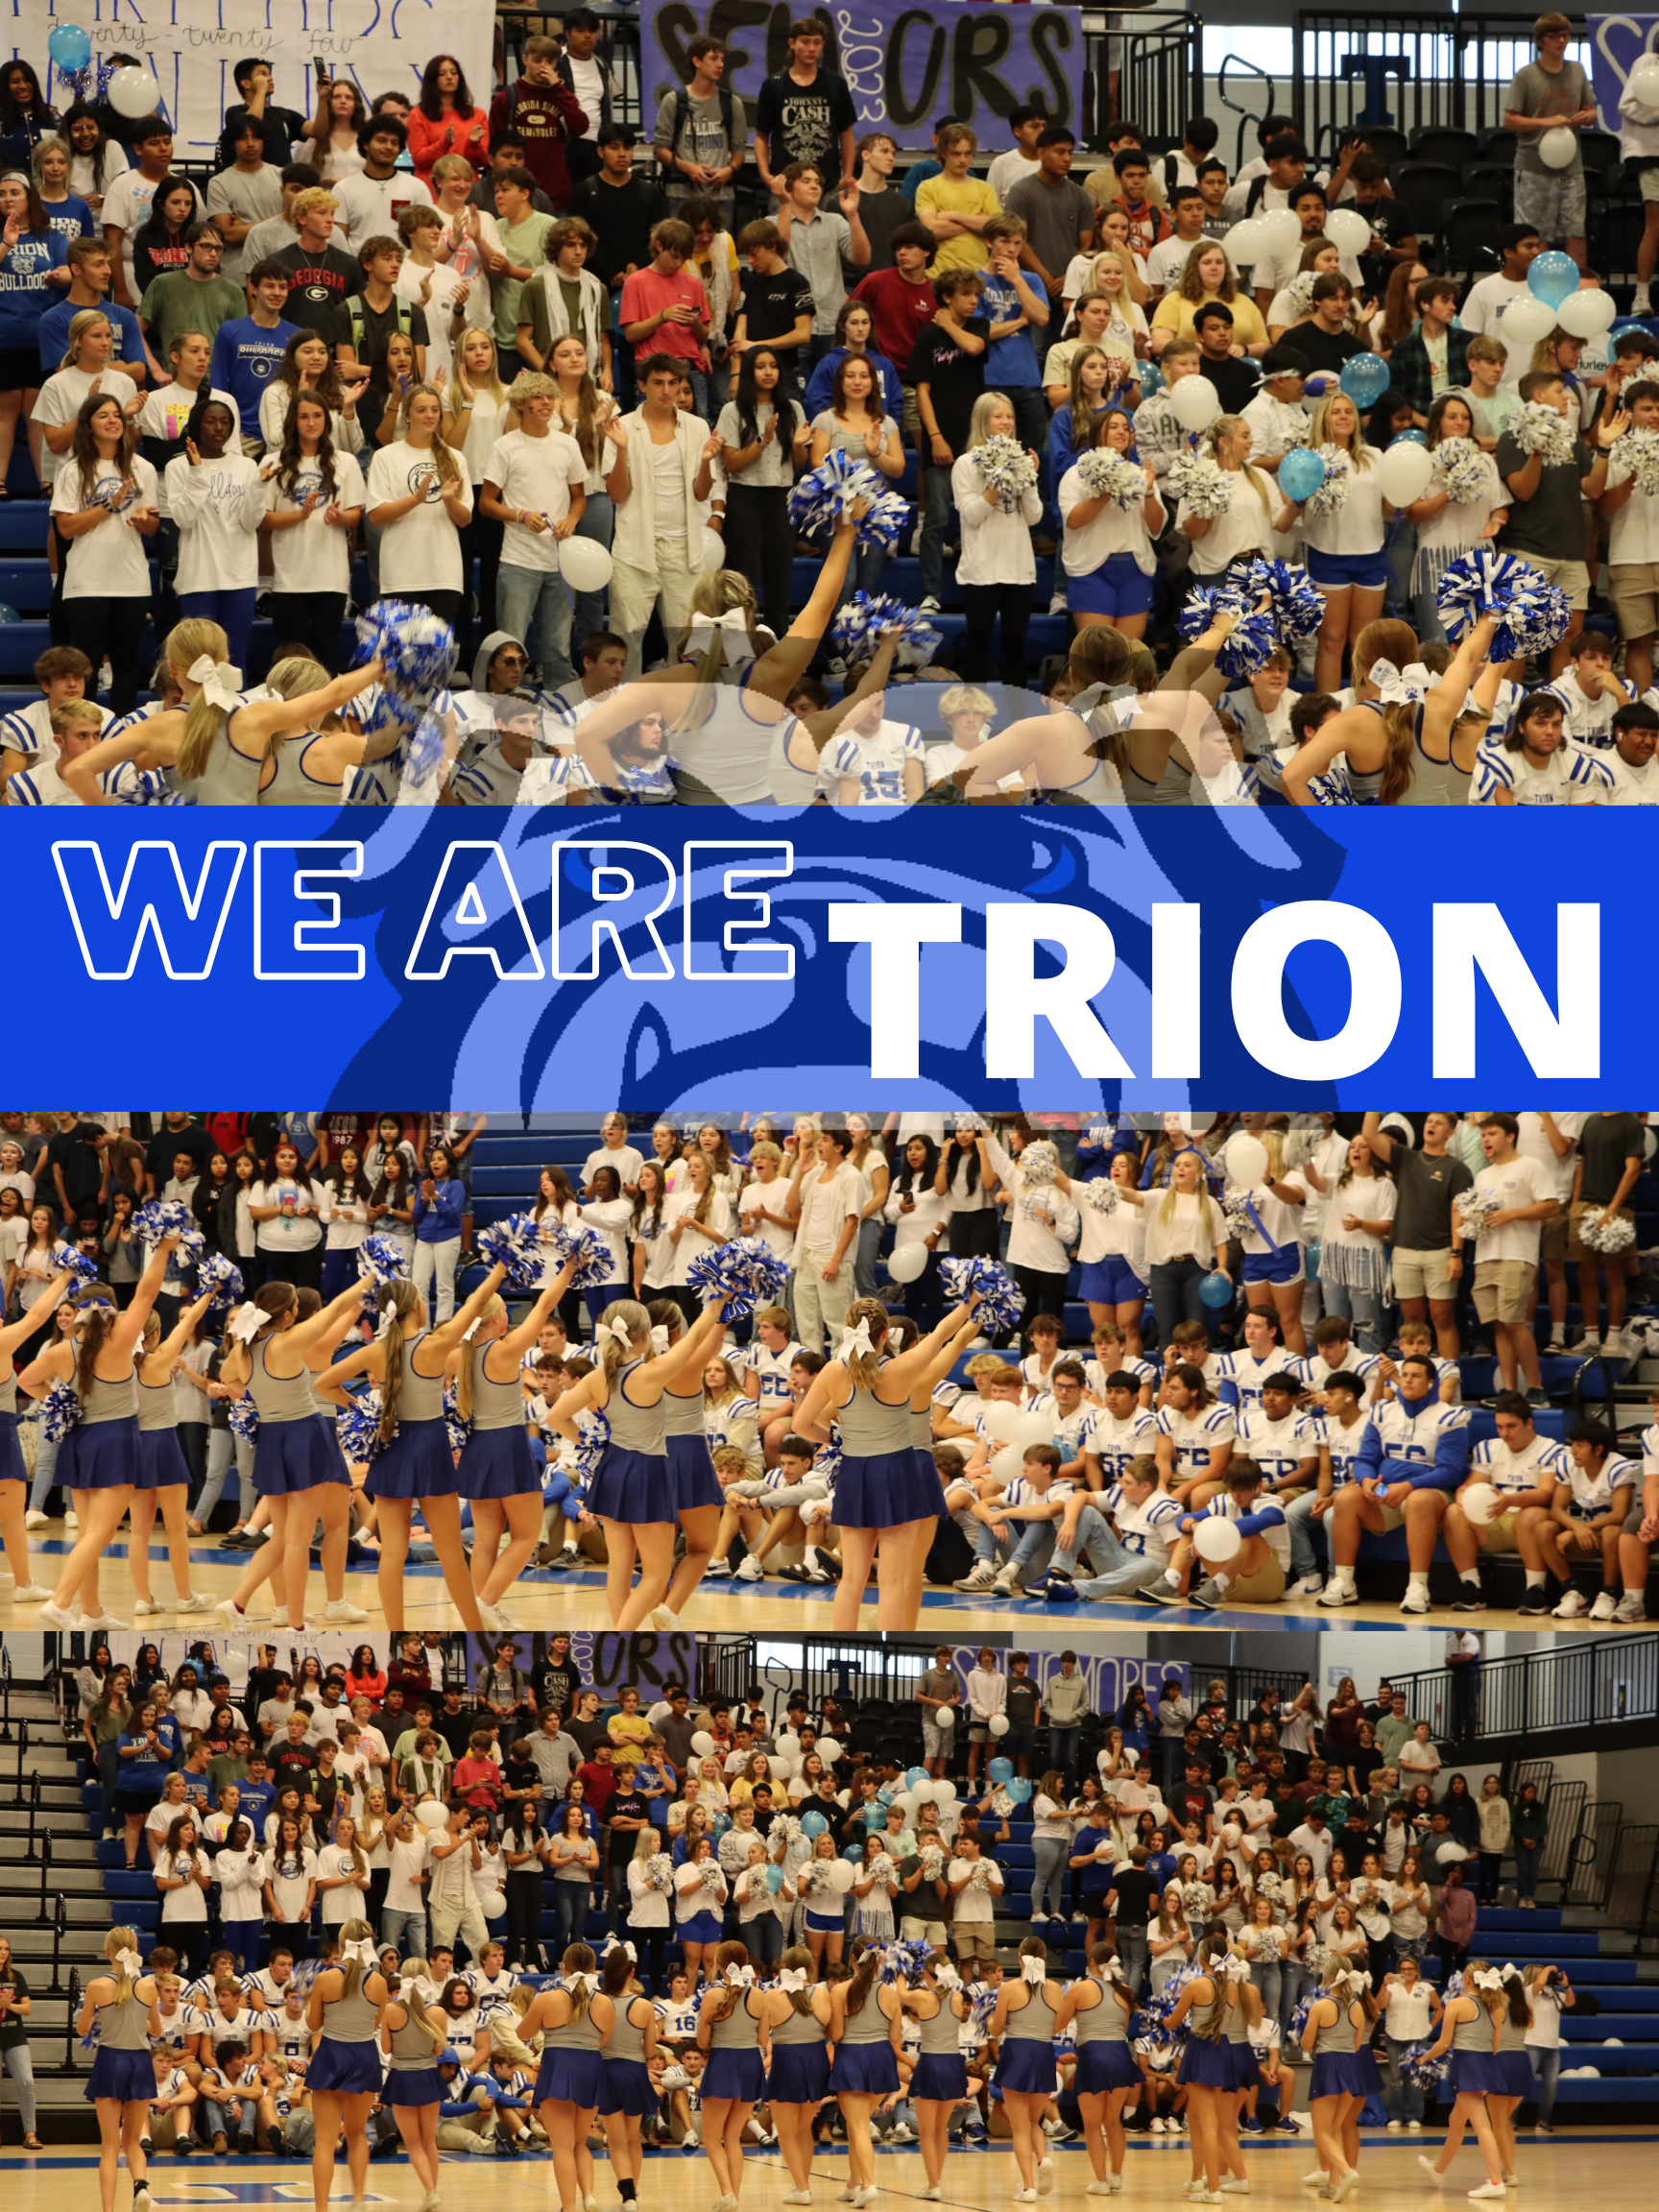 WE ARE TRION